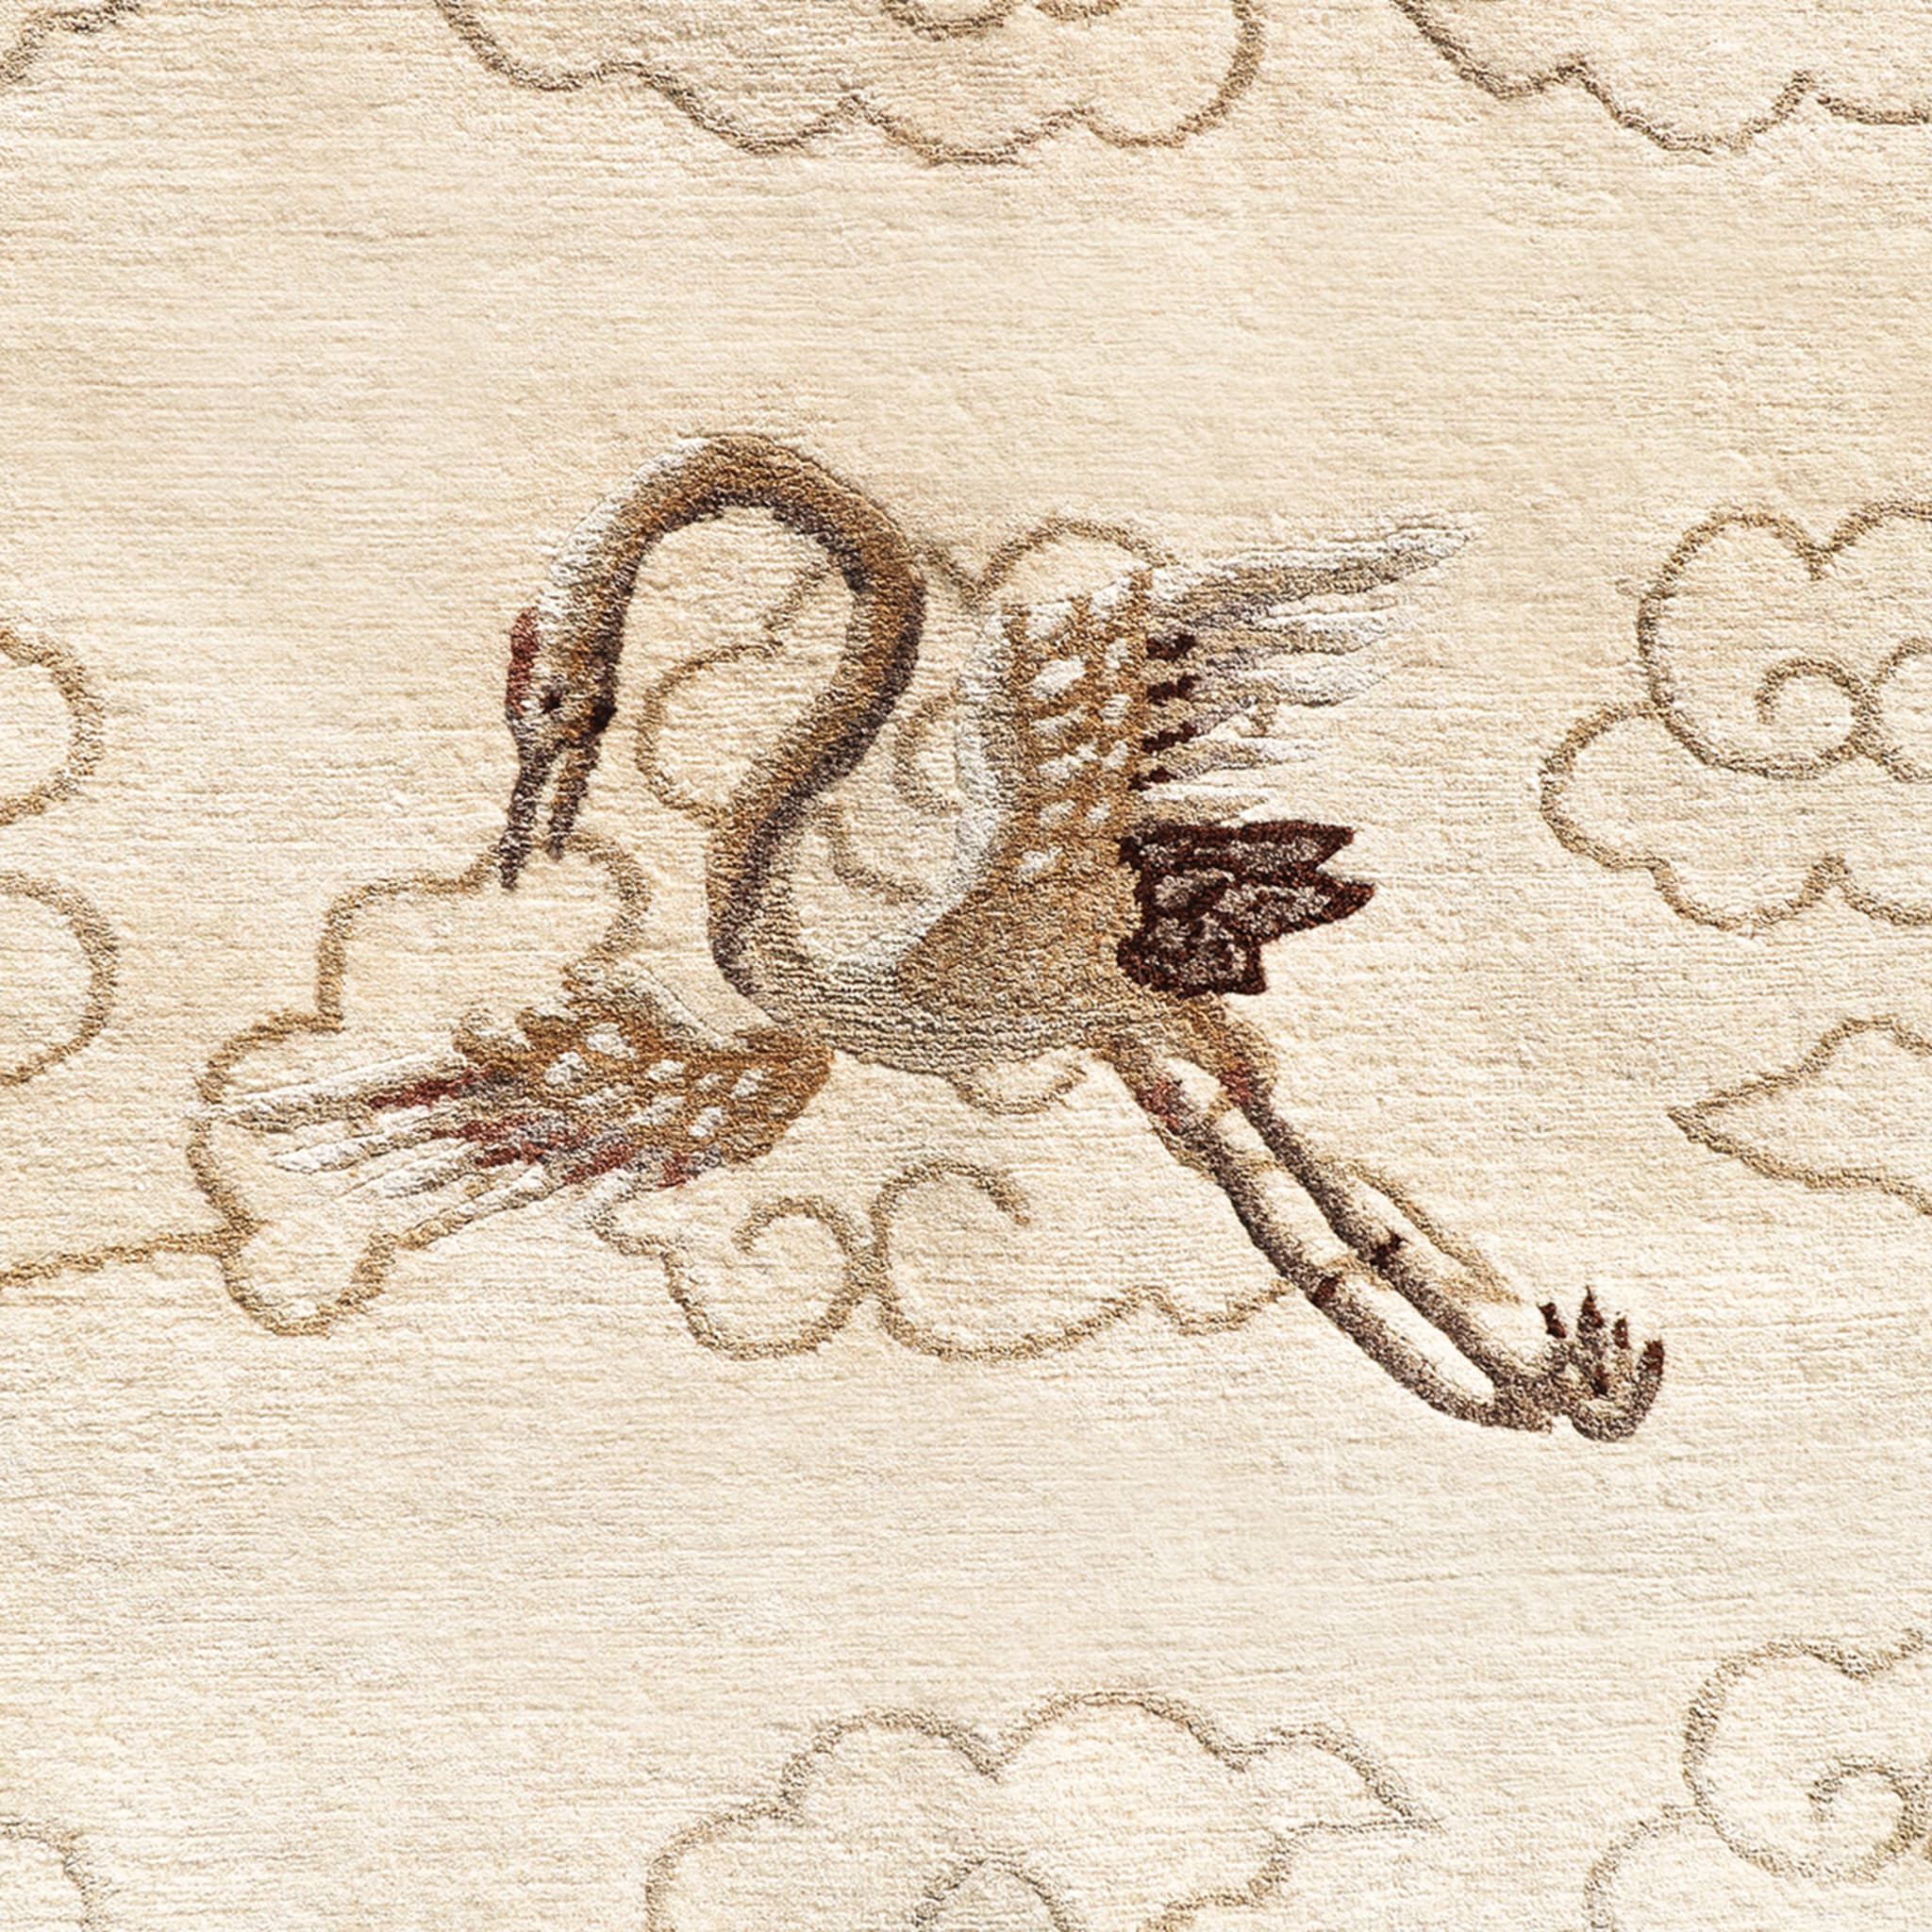 Chinoiserie Collection Manchurian Cranes Eggshell Rug - Alternative view 5